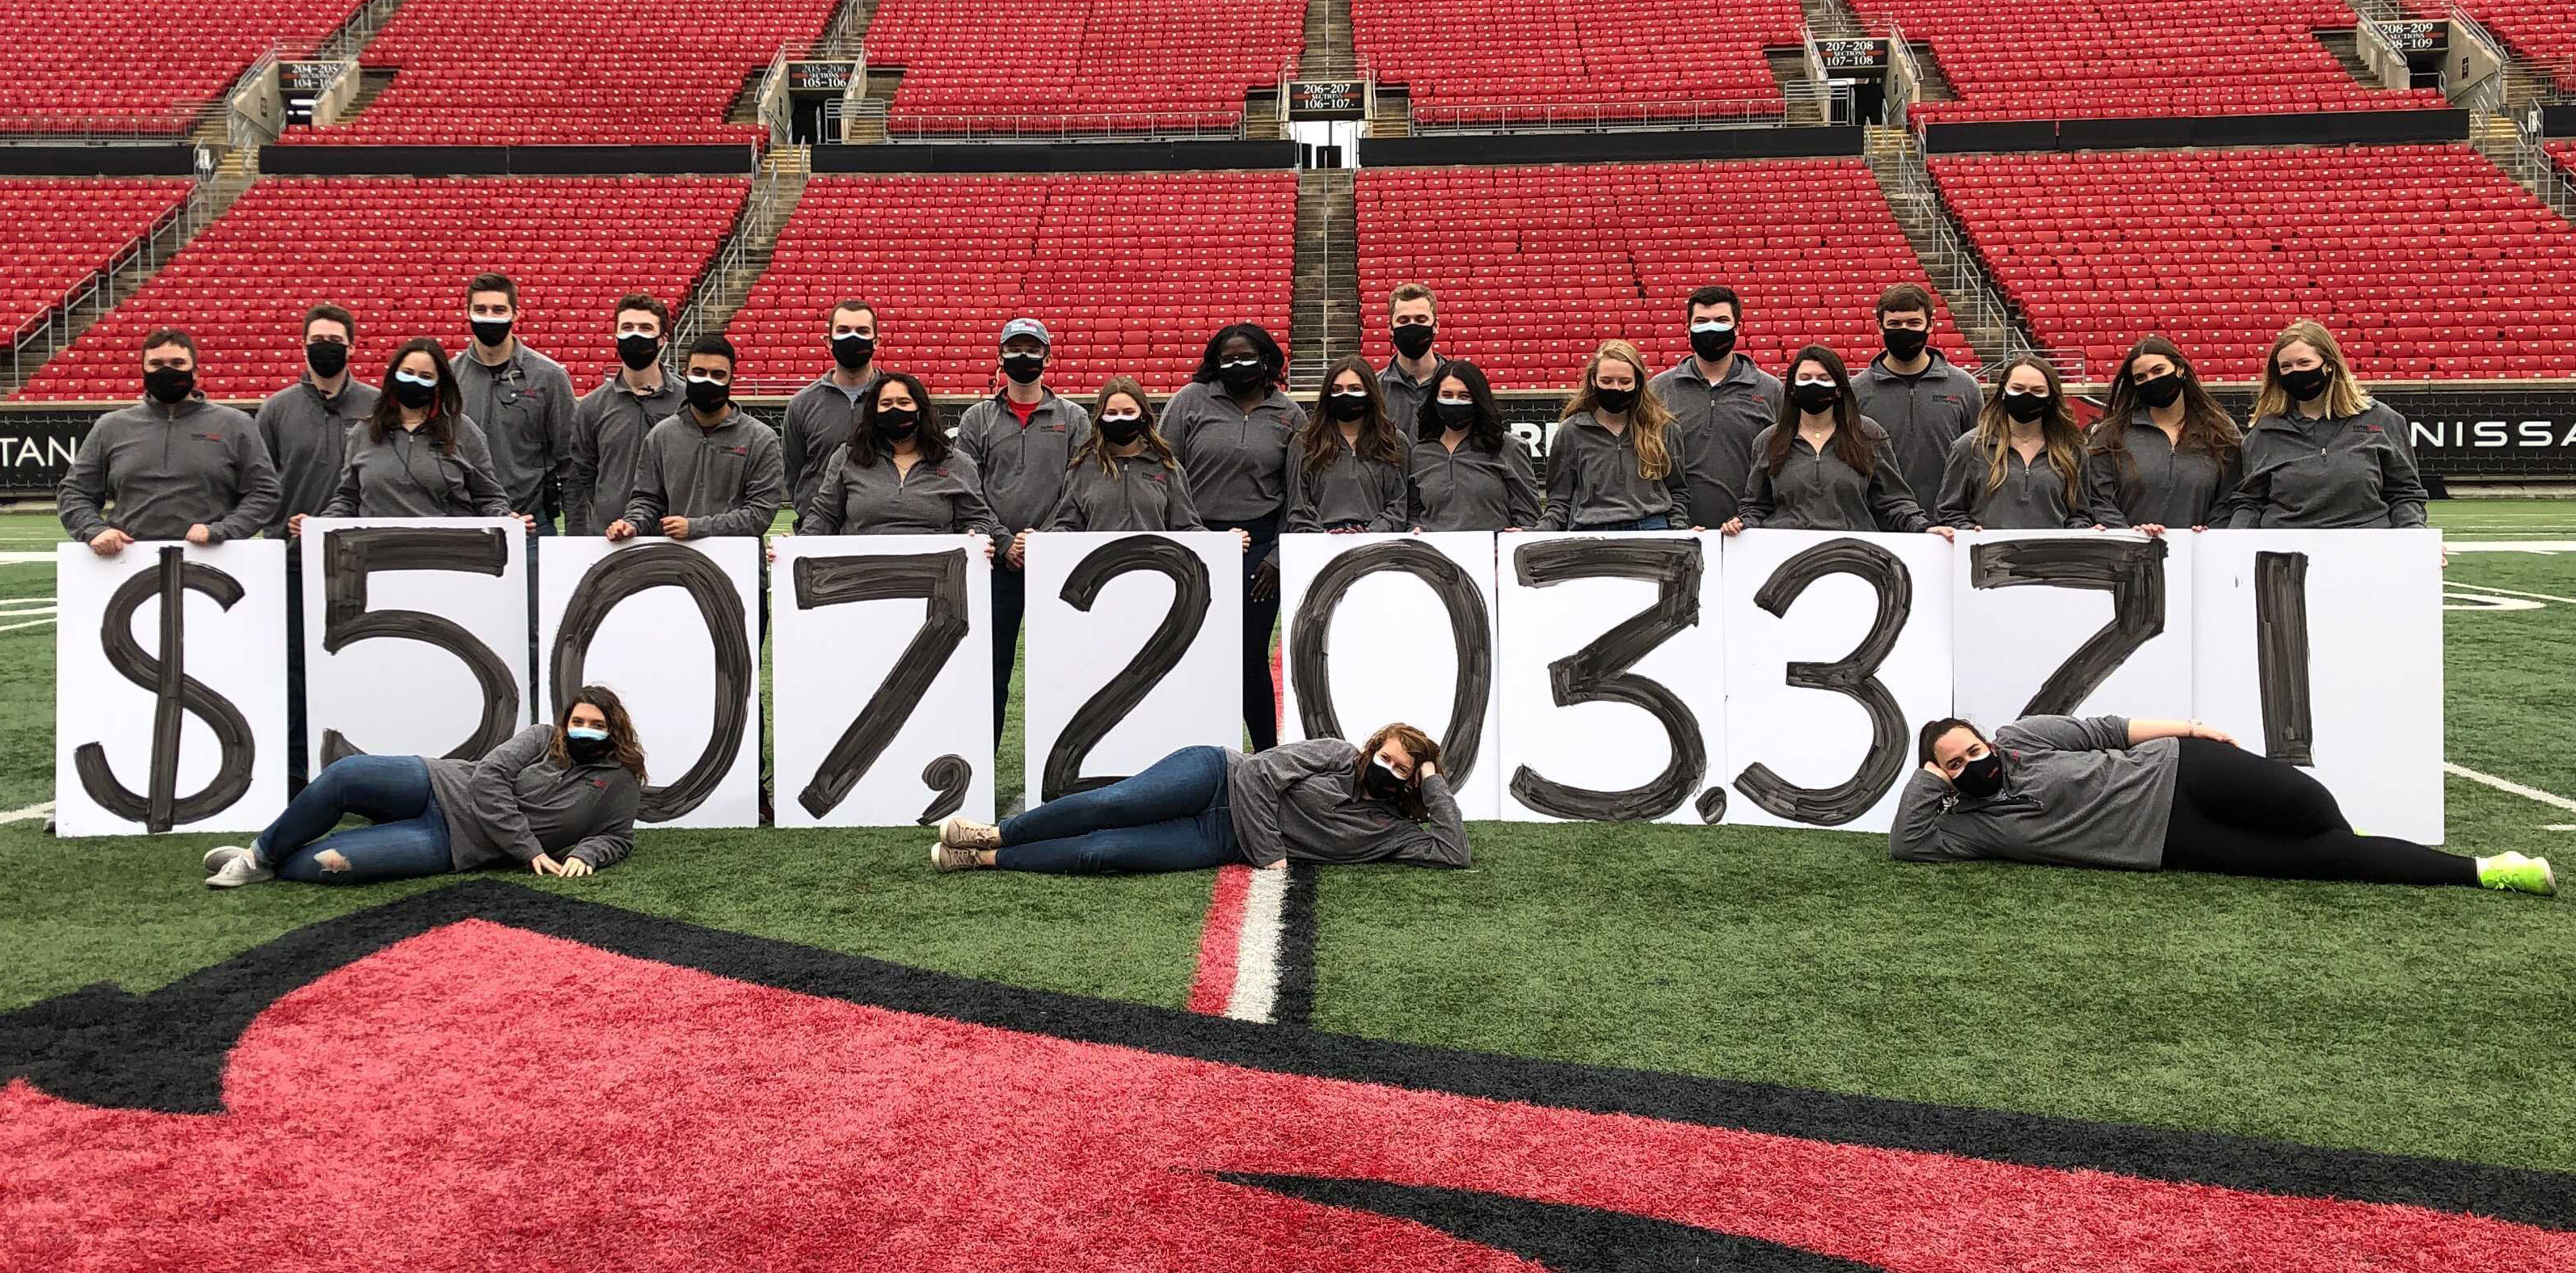 raiseRED students holding their $507,203.37 total